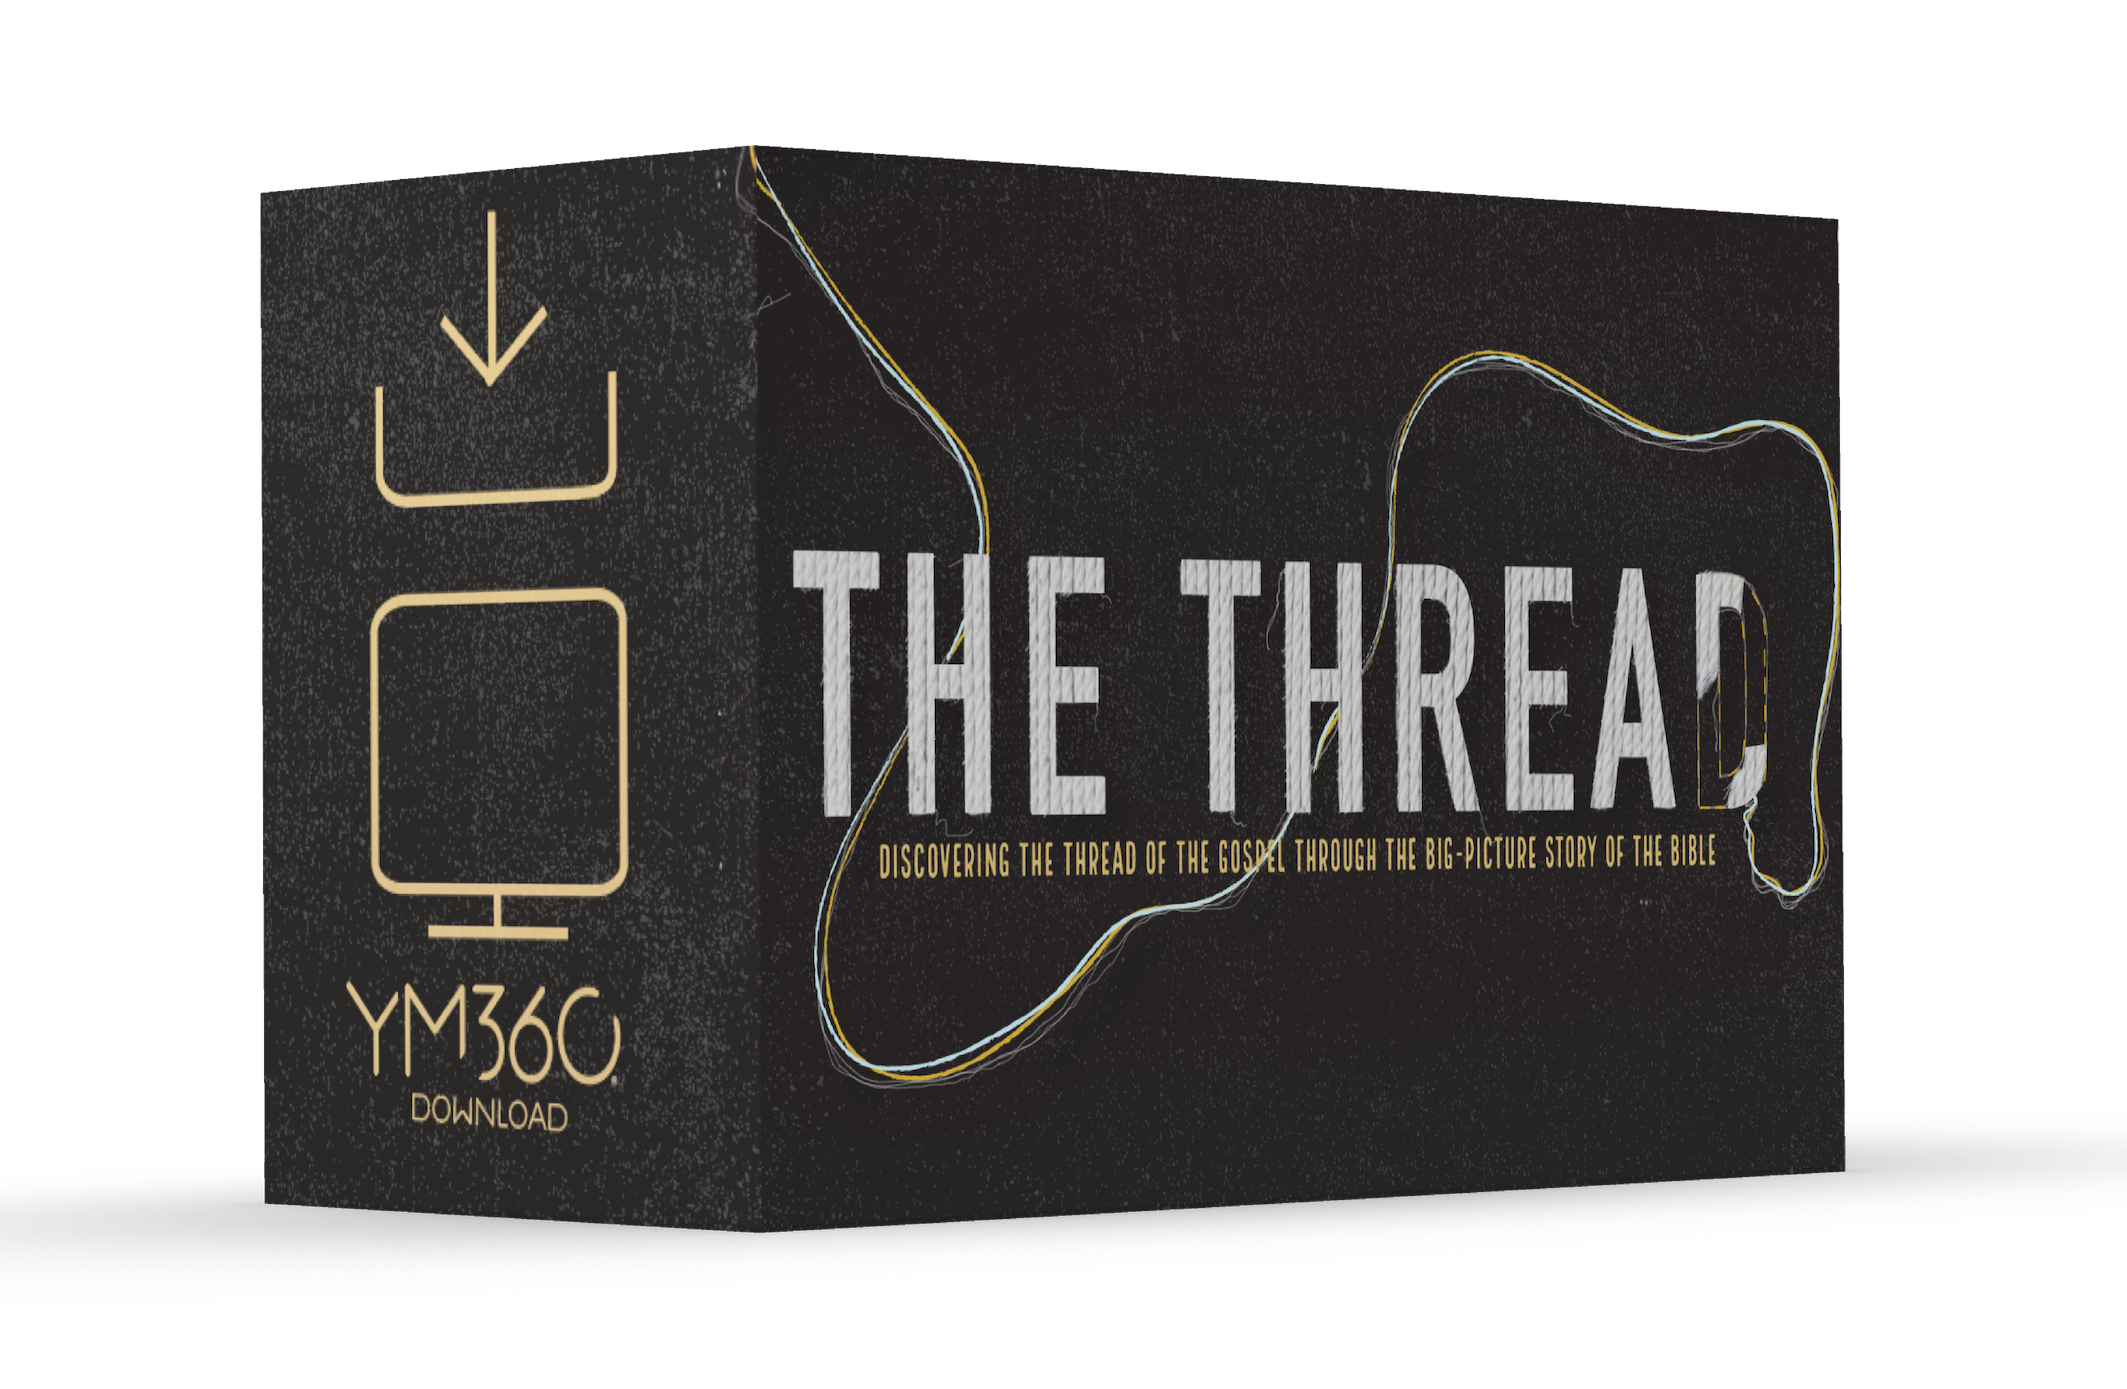 The Thread: Discovering the Thread of the Gospel Through the Big-Picture Story of the Bible